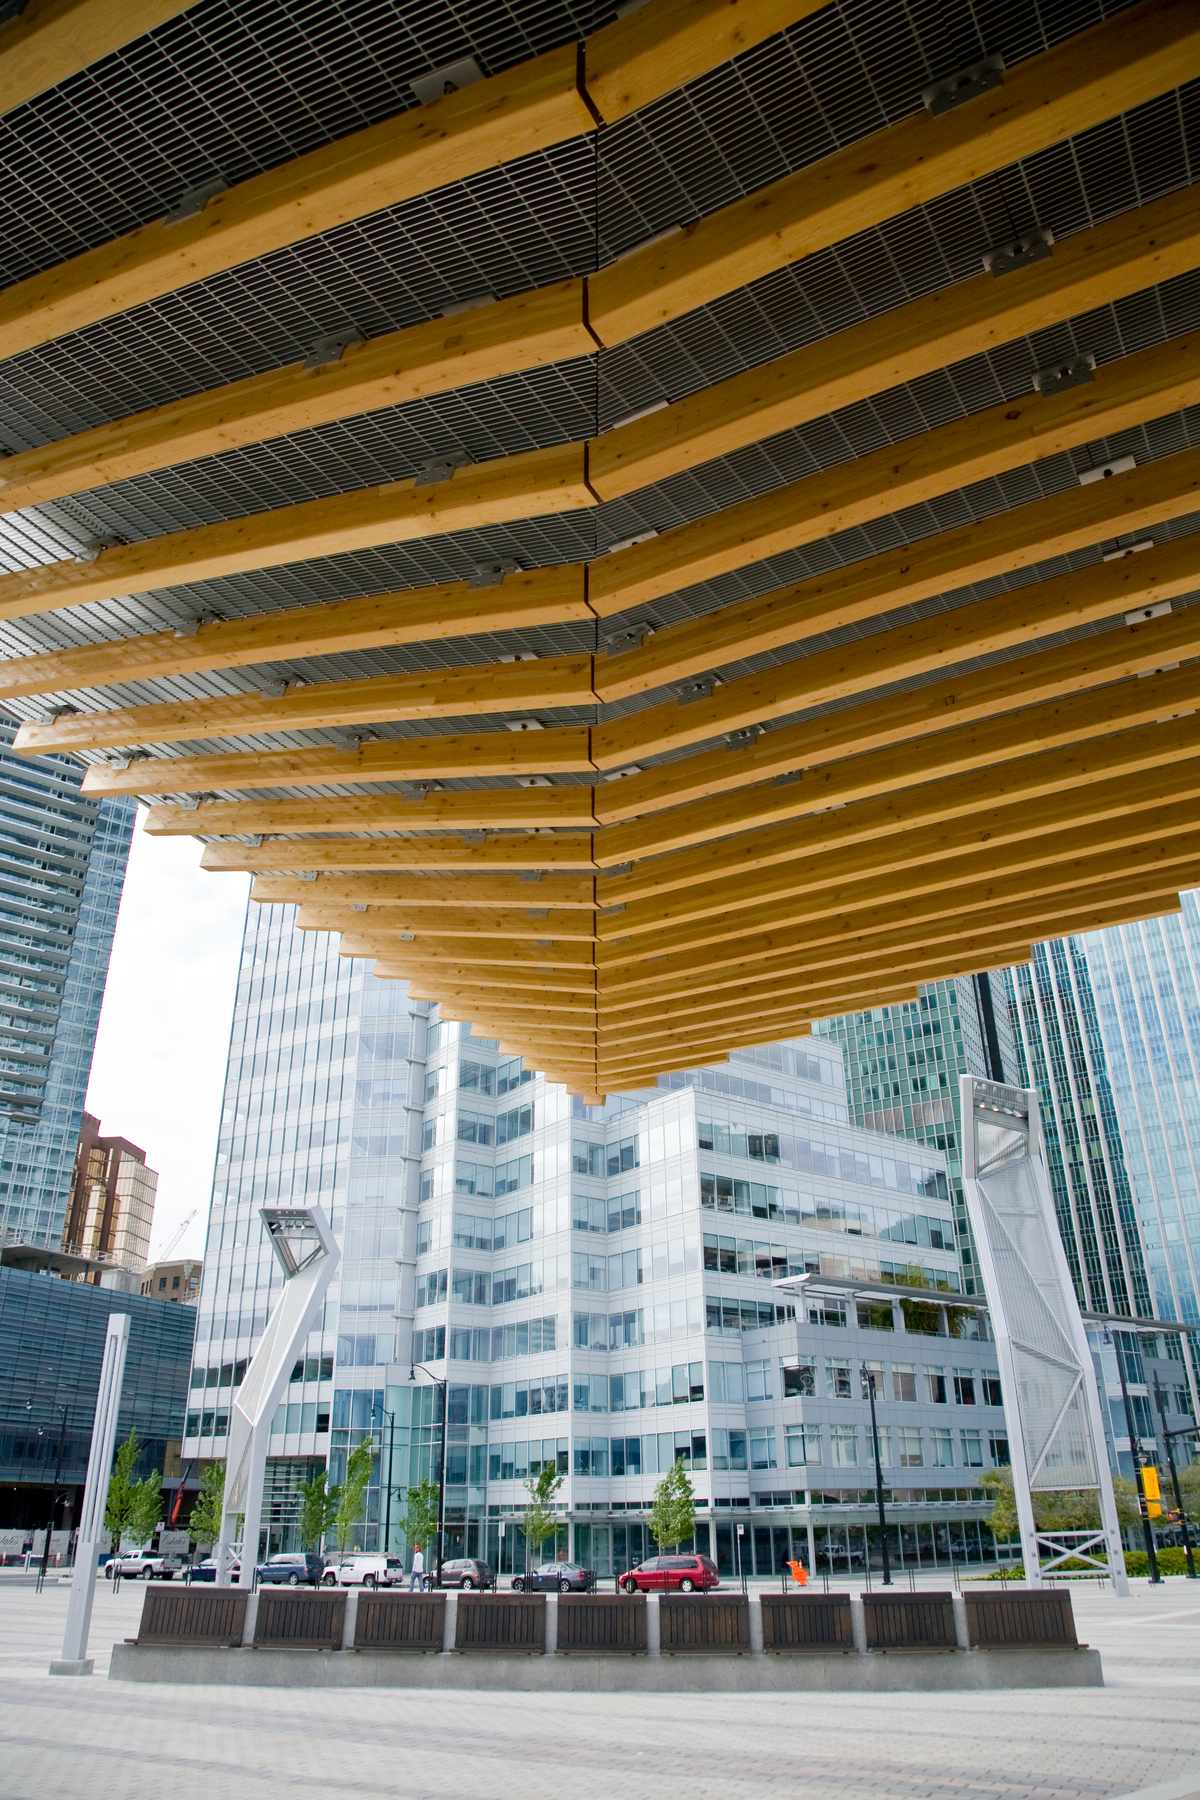 glue-laminated timber (Glulam) ceiling beams are clamped to a metal gridwork in this daytime closeup exterior image at the Vancouver Convention Centre West Building